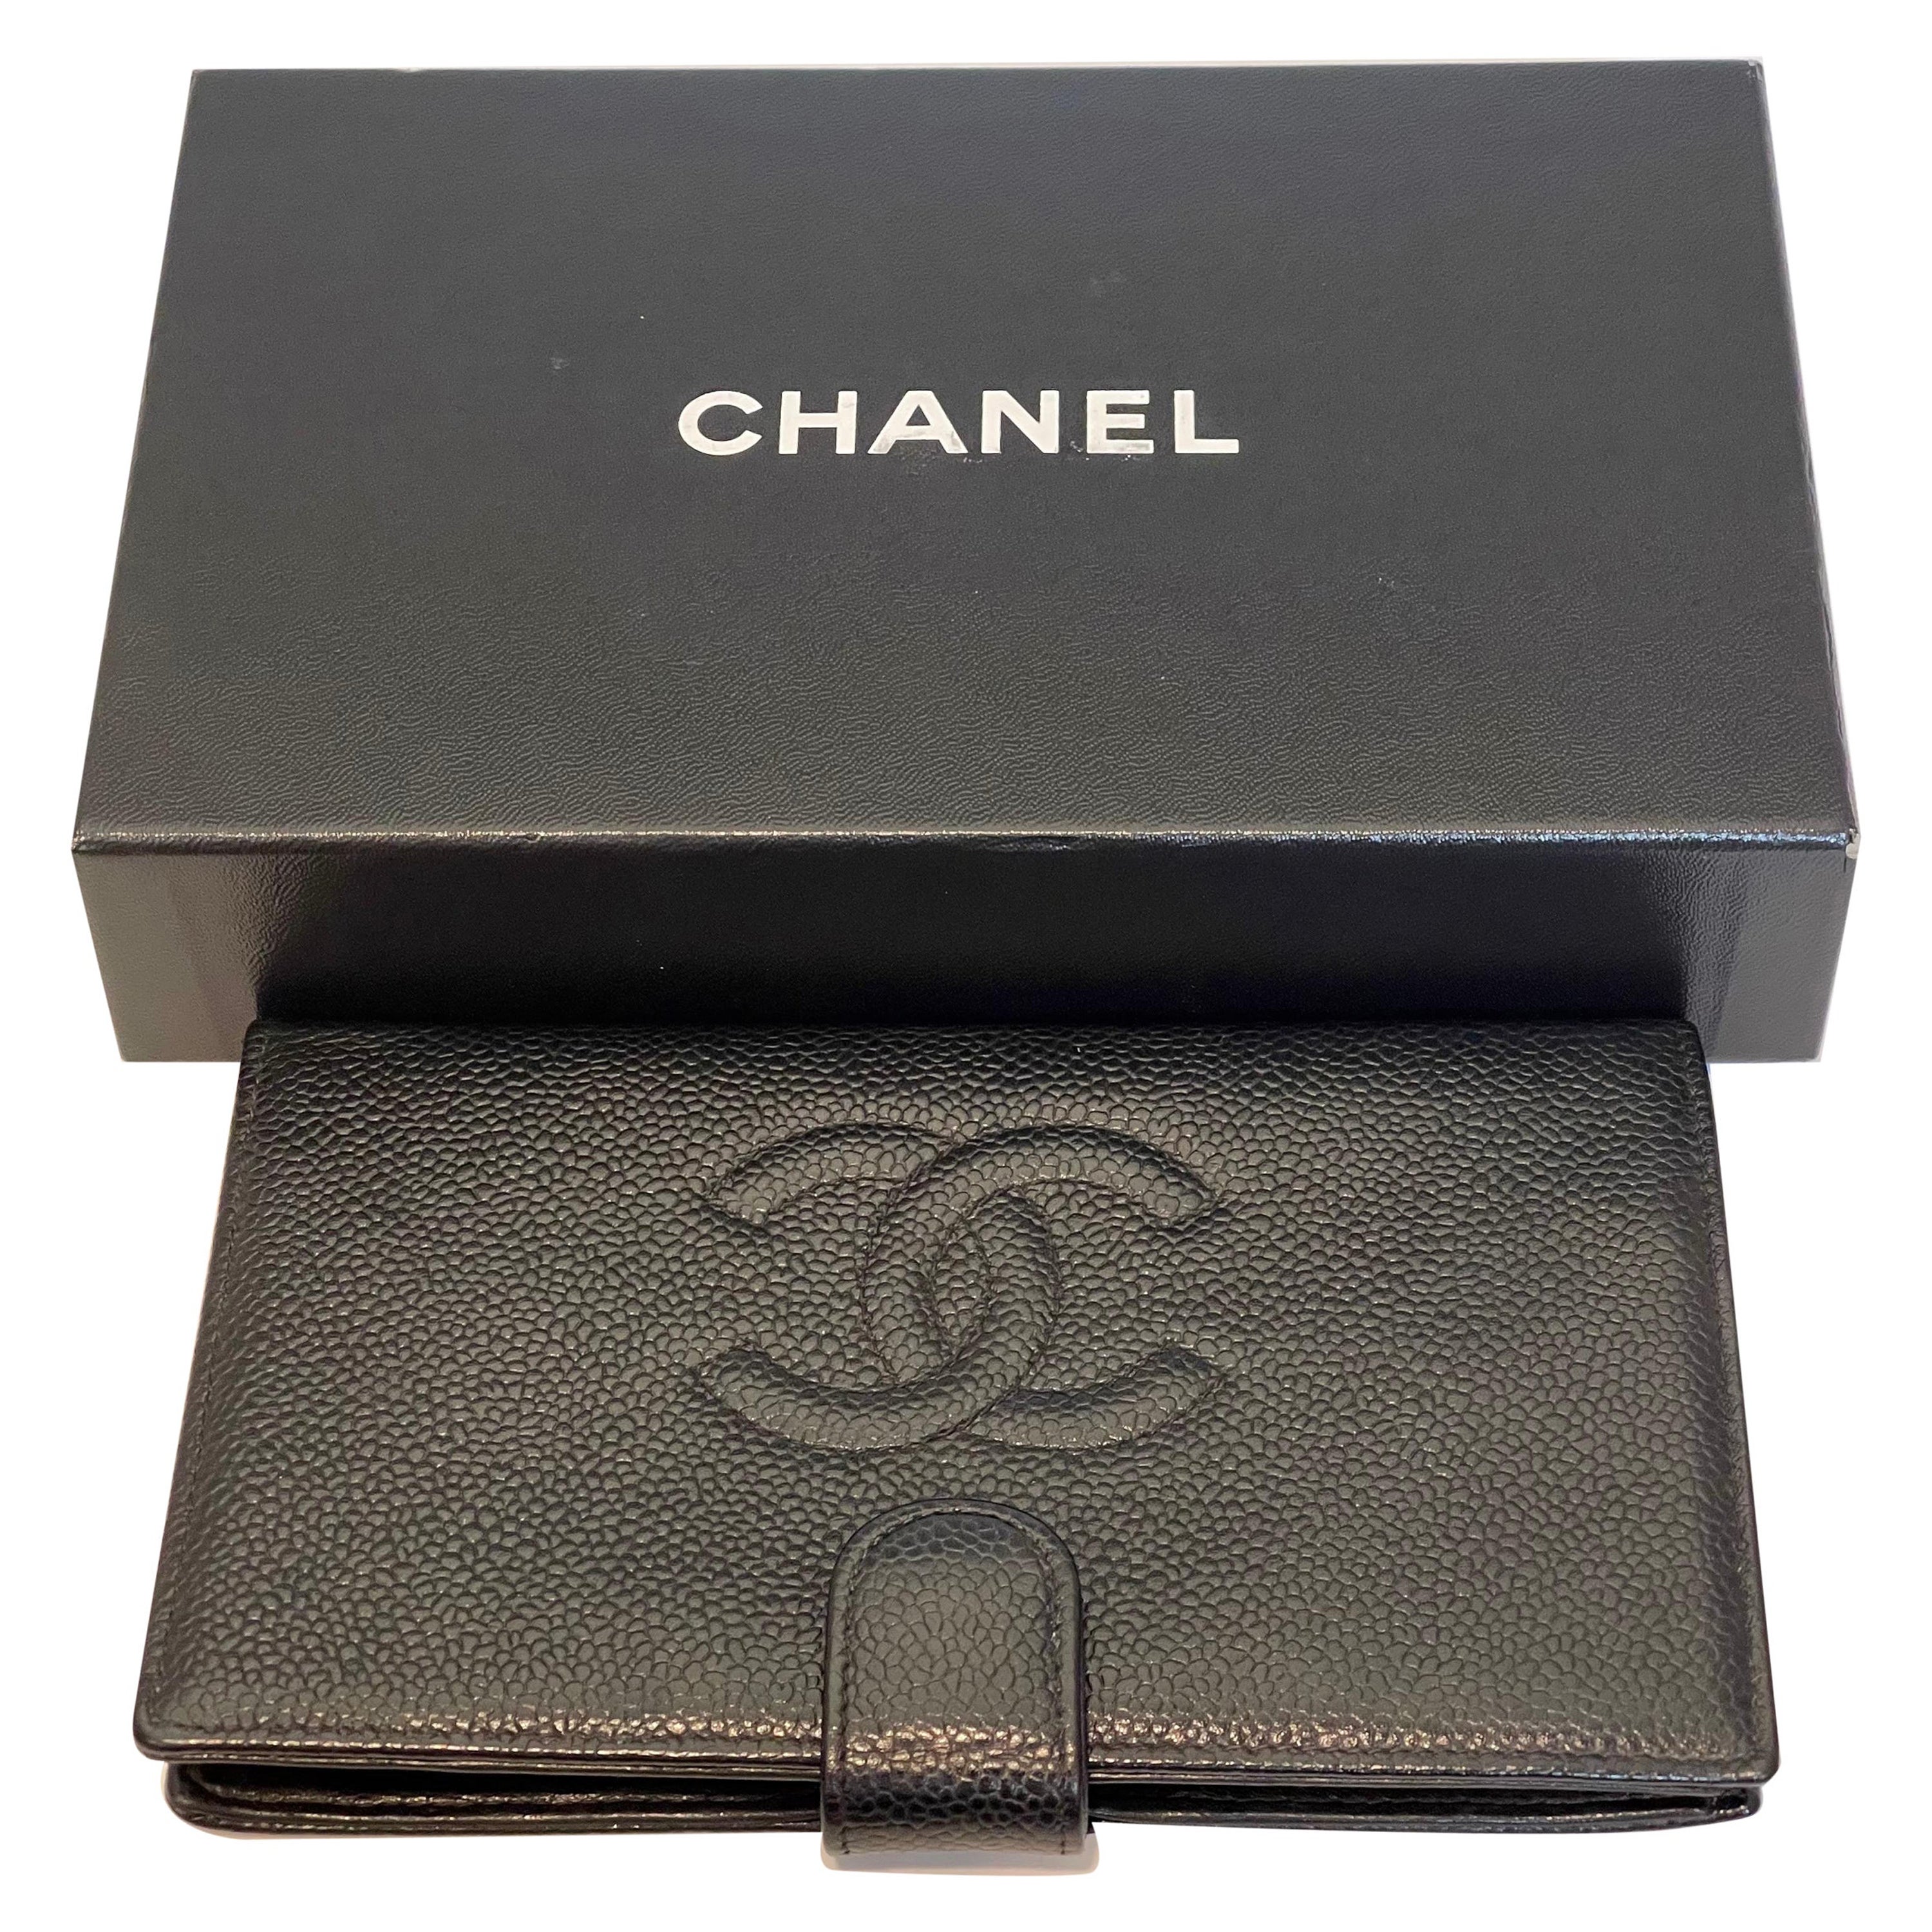 Chanel Classic n Black Caviar Leather Cc-w0128p-0003 French Kisslock Wallet long